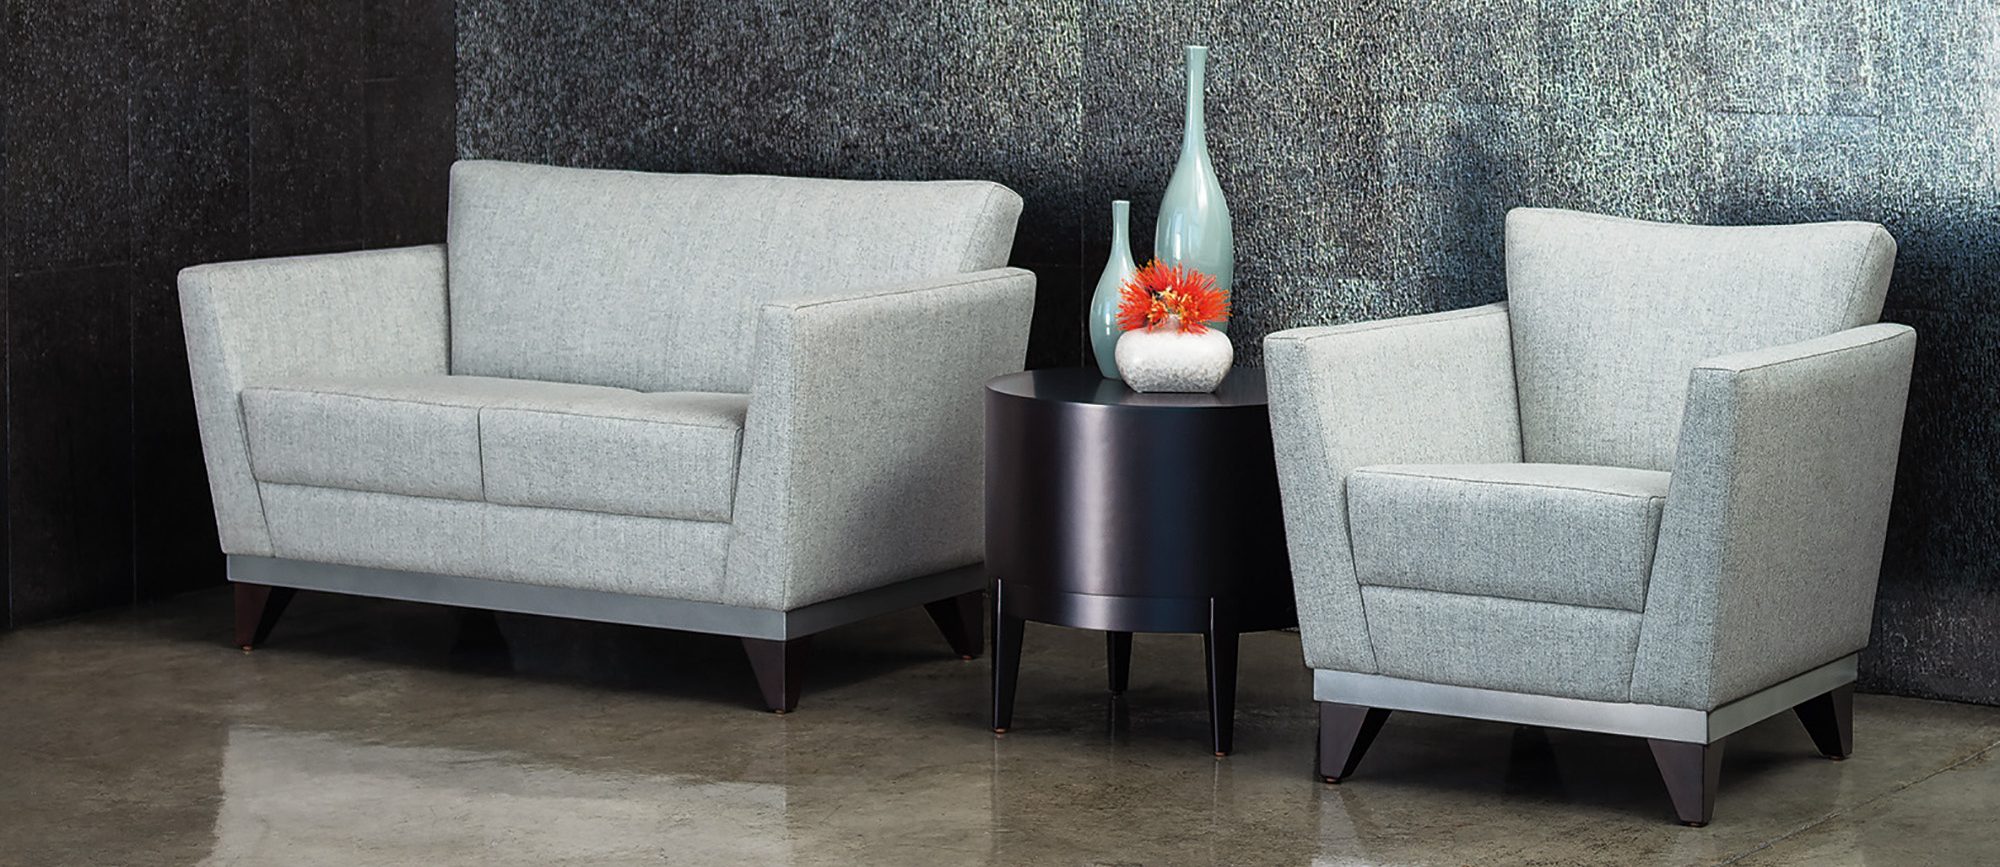 Huddle Lounge and Love Seat with Ovate Occasional Tables